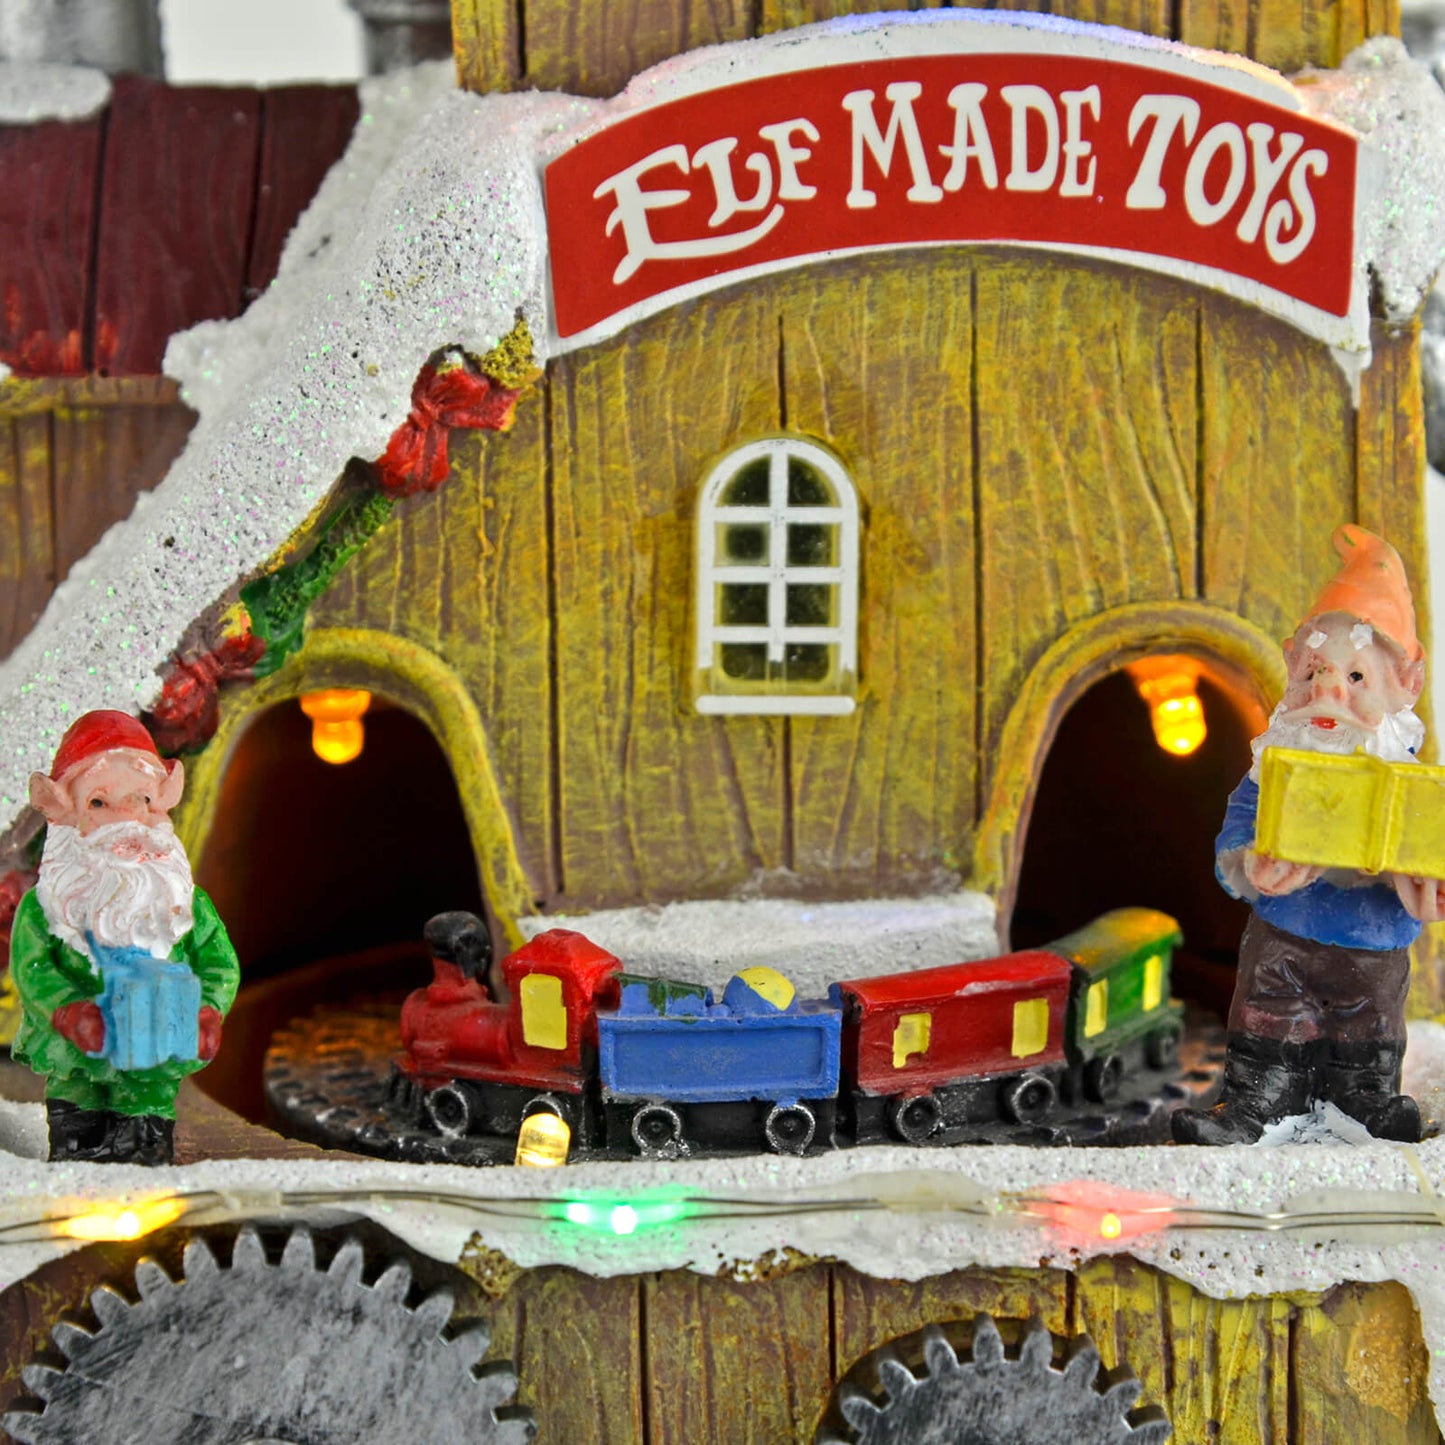 Close up of 2 elves at Elf Made Toys with presents beside a train lit by LED lights